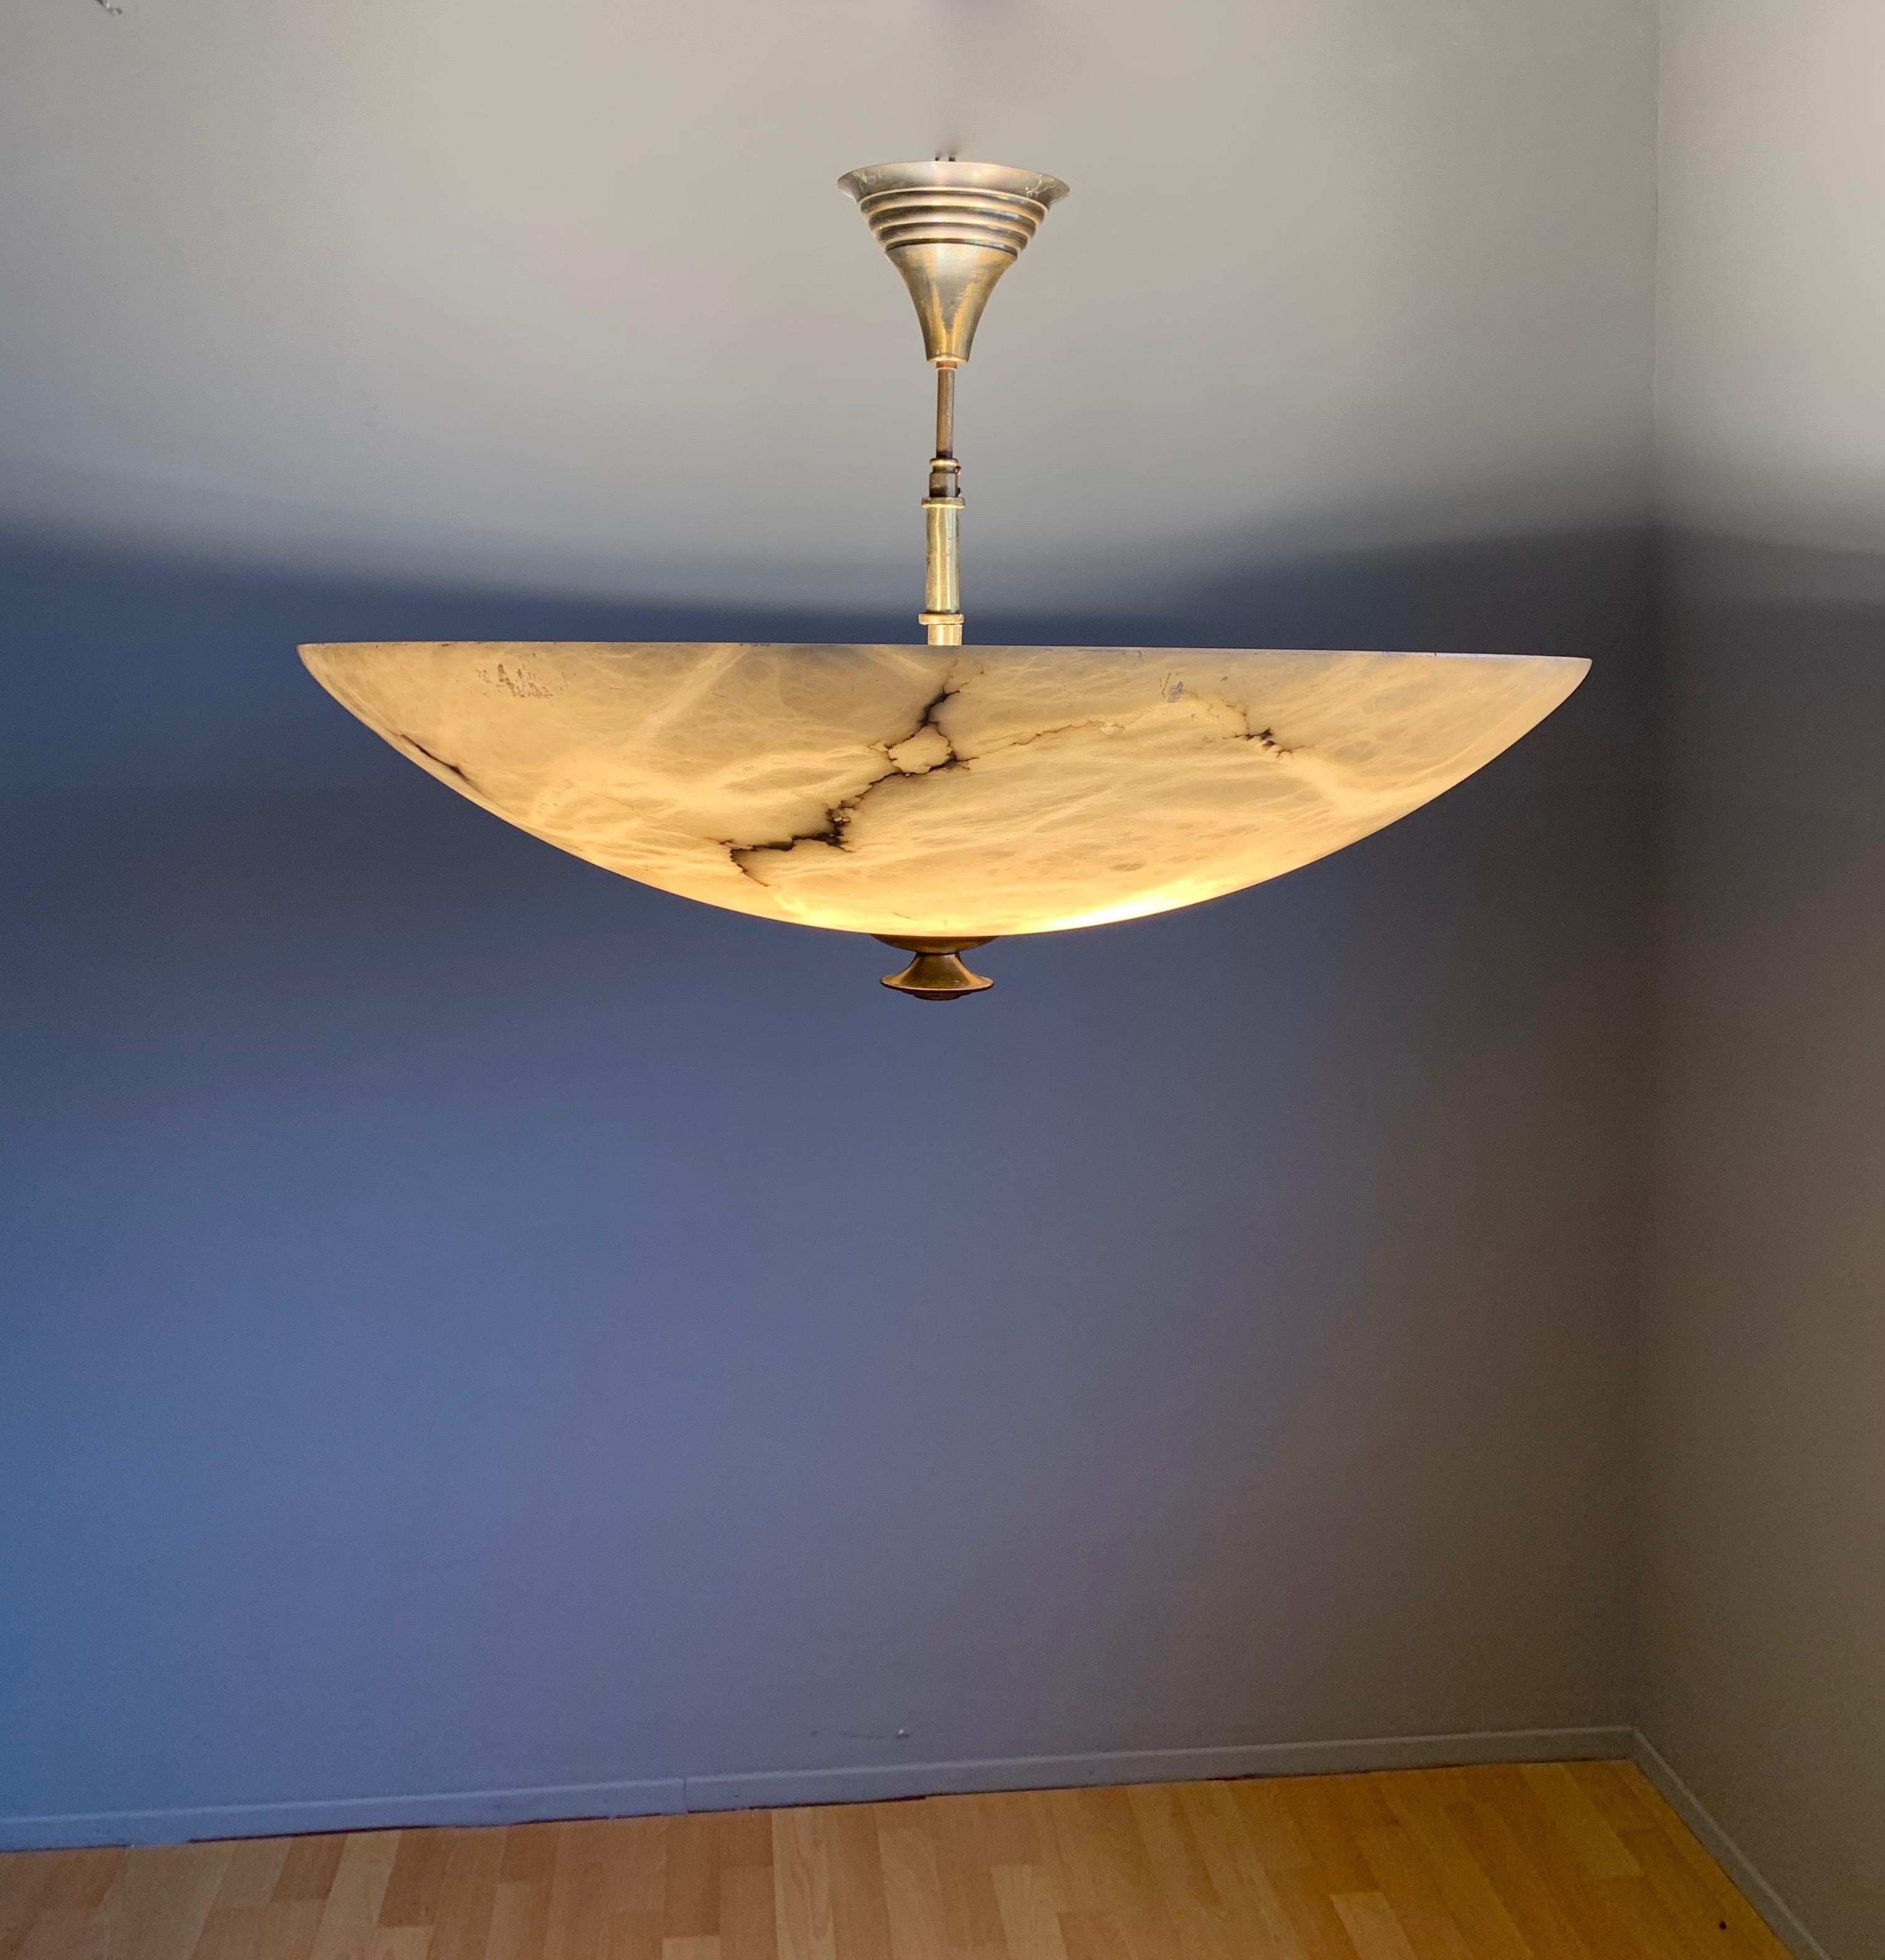 Largest ever and excellent condition Art Deco Style ceiling lamp.

Over the years we have sold a number of beautiful and timeless alabaster light fixtures, but we had never even seen an alabaster fixture of this enormous size. For it to have found